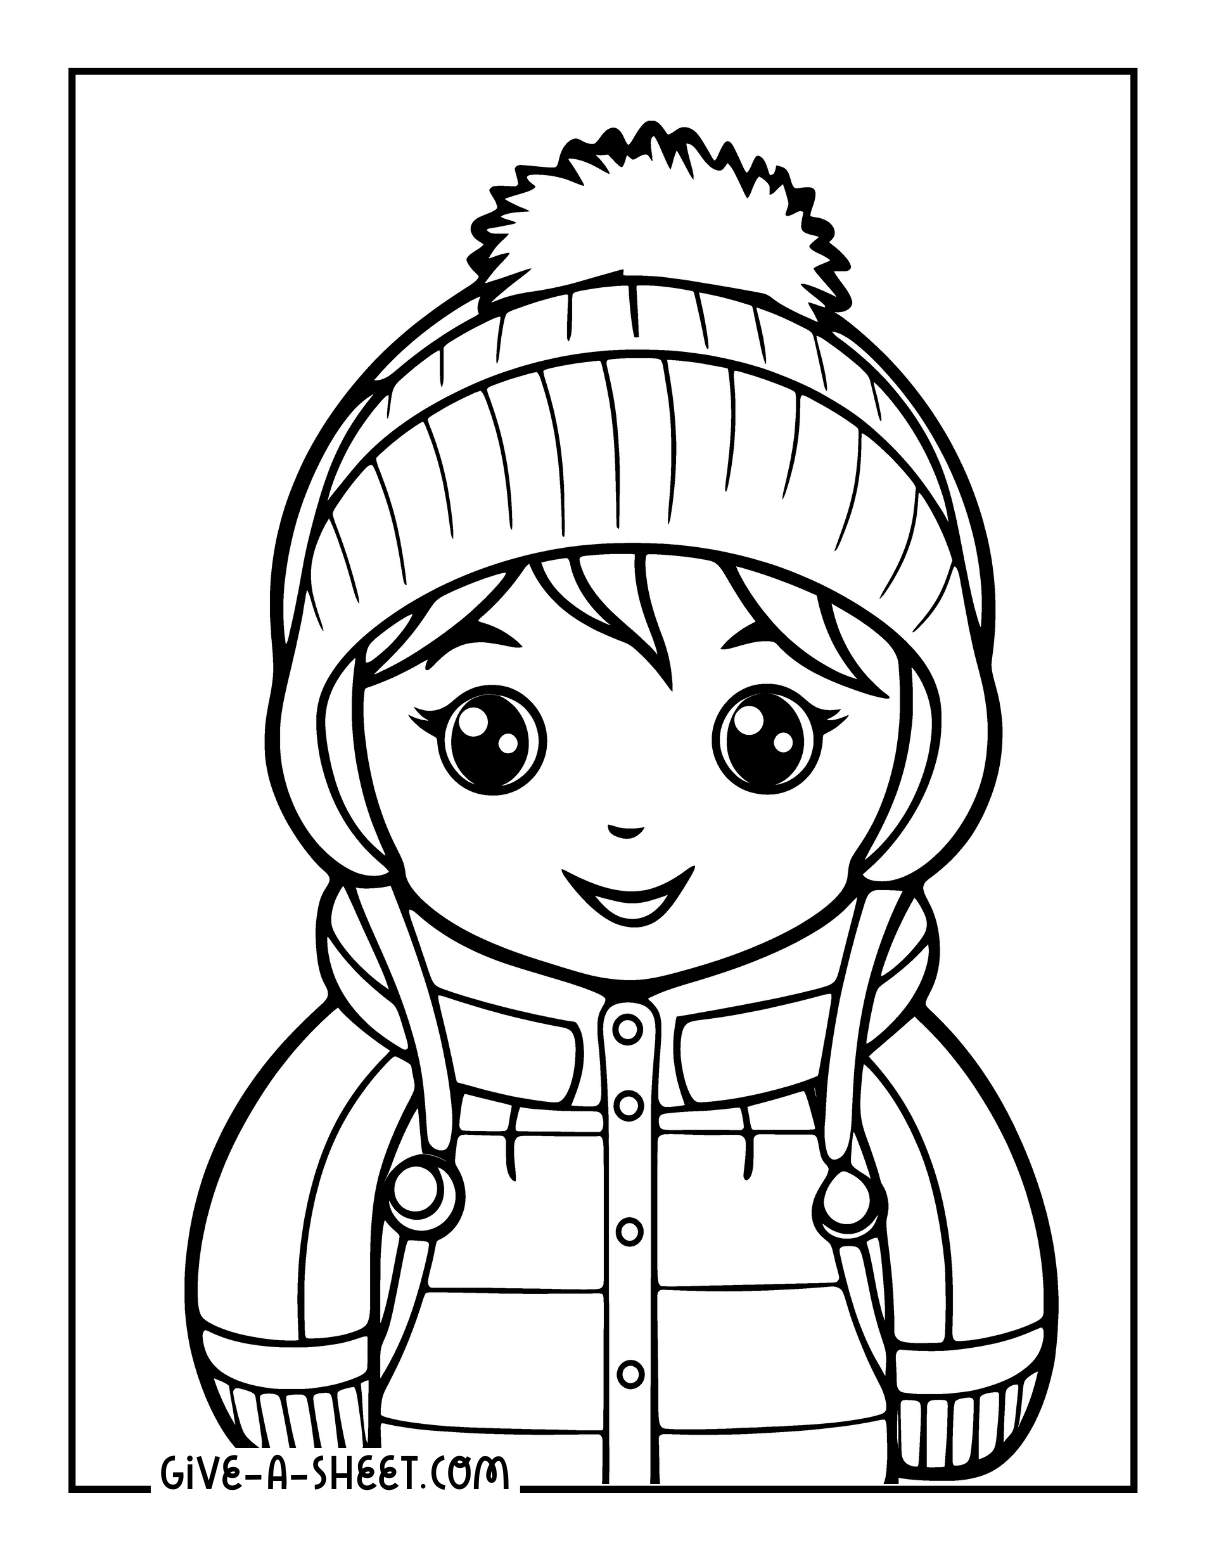 Girl wearing a fleece lining jacket and a trapper hat coloring sheet.